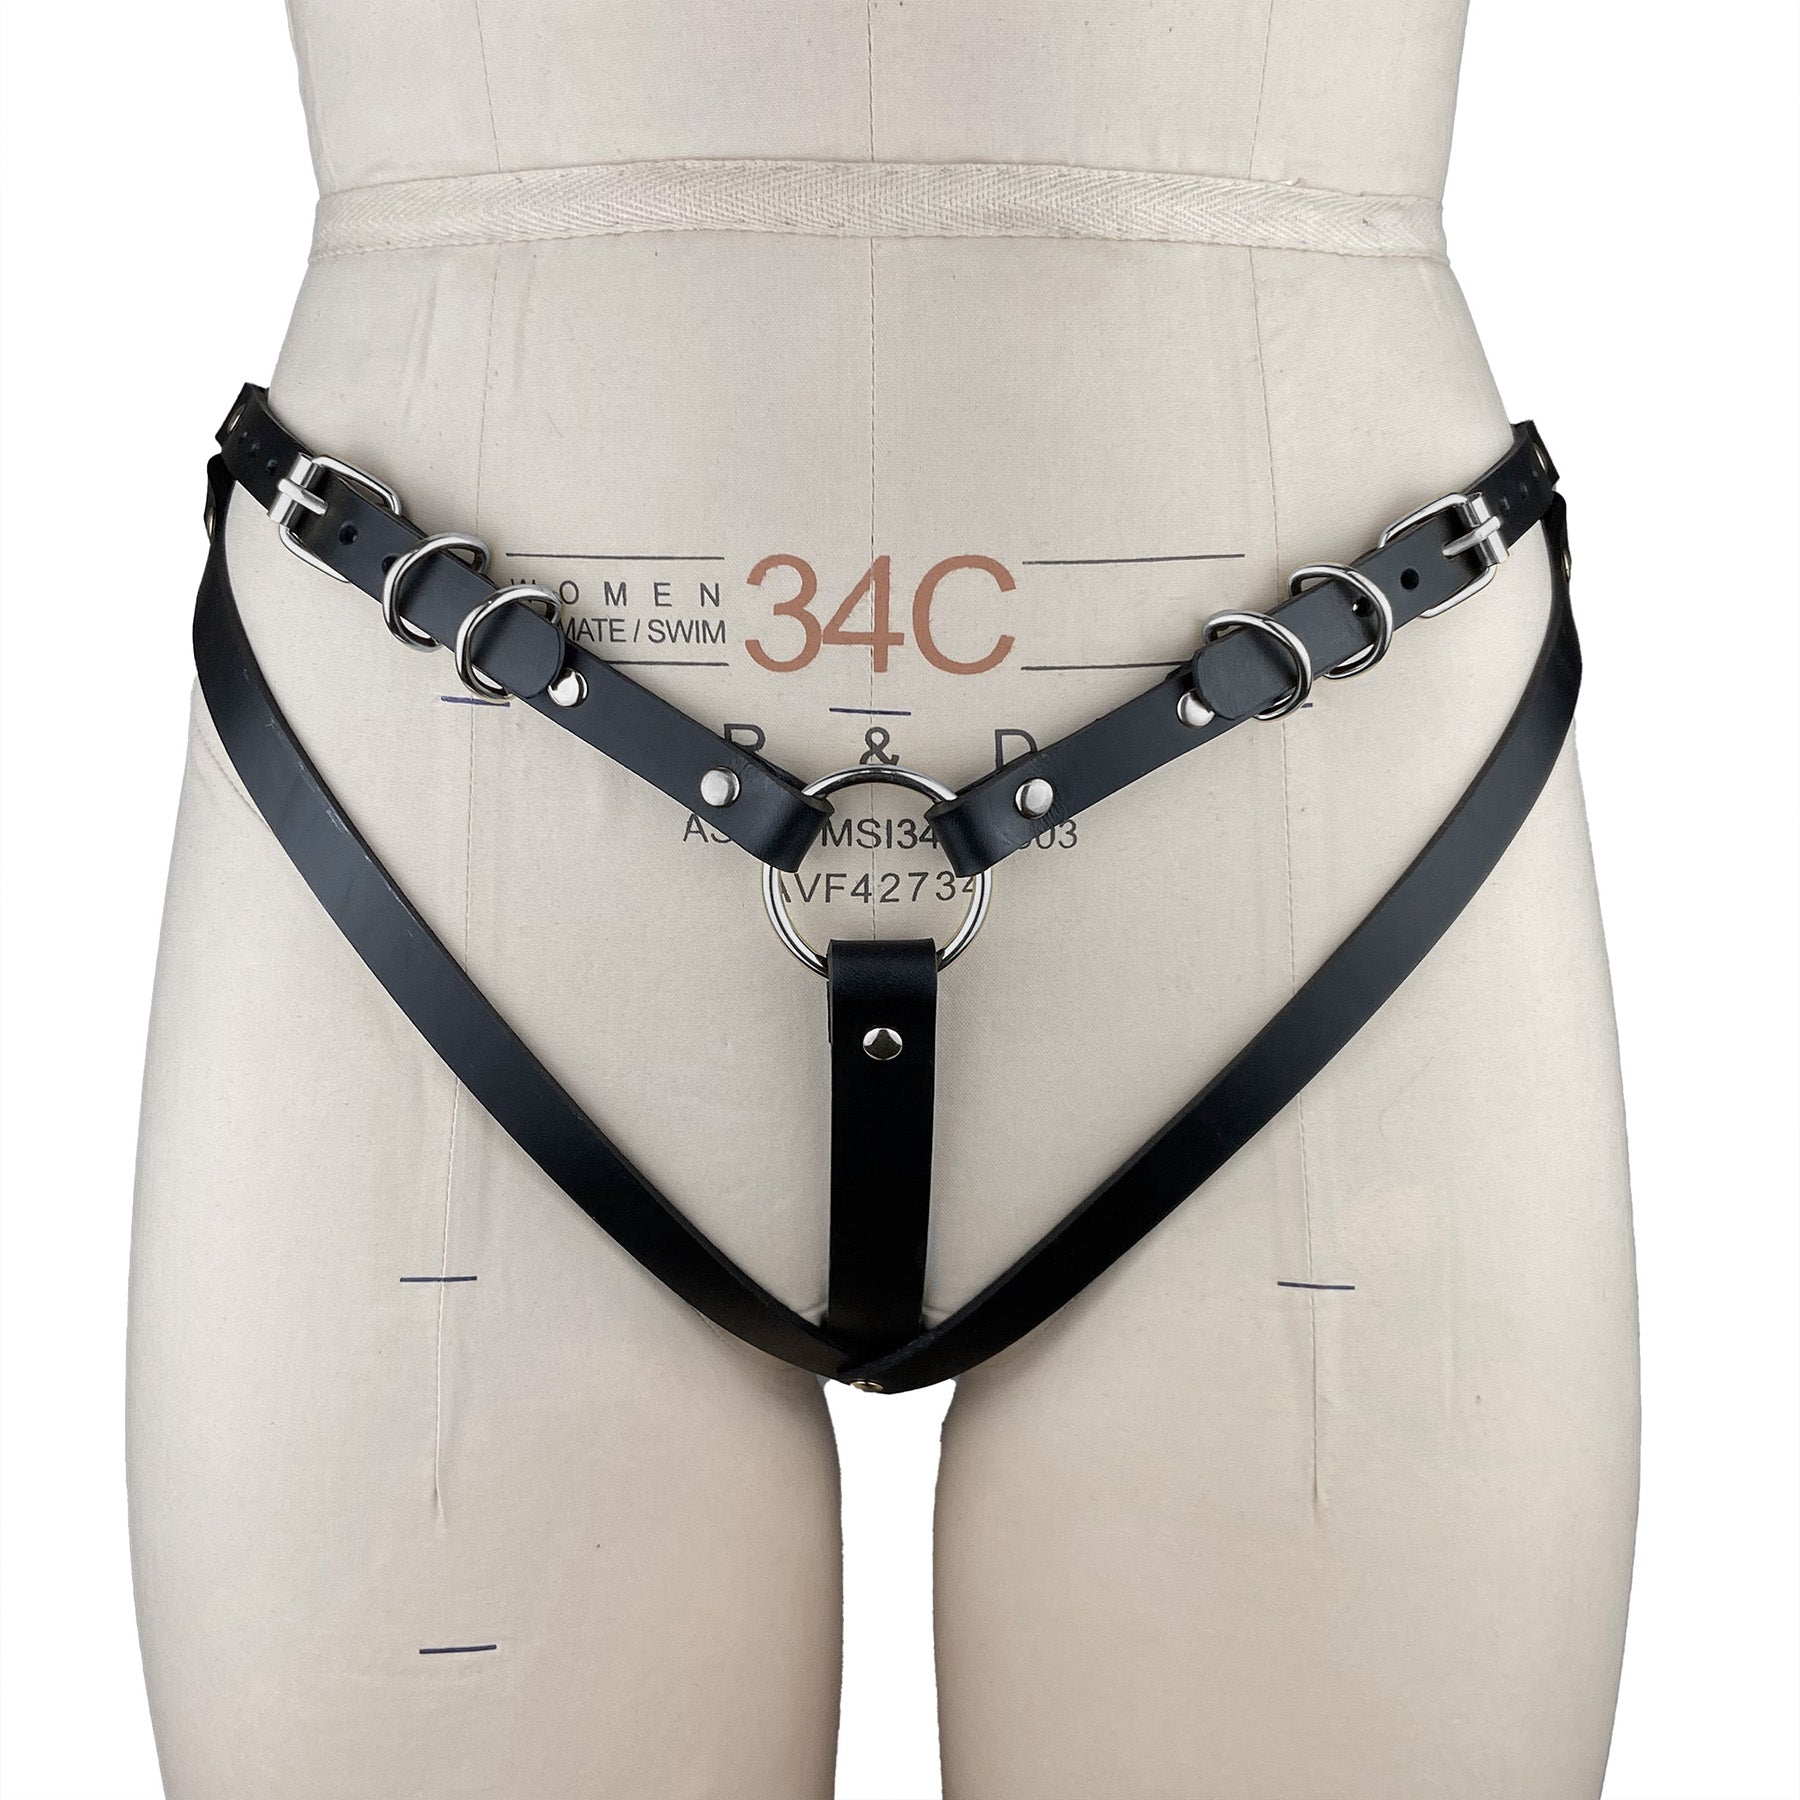 luxury Italian leather fashion and fetish women's men's gabriella thong, bespoke, made-to-order in nyc, front view